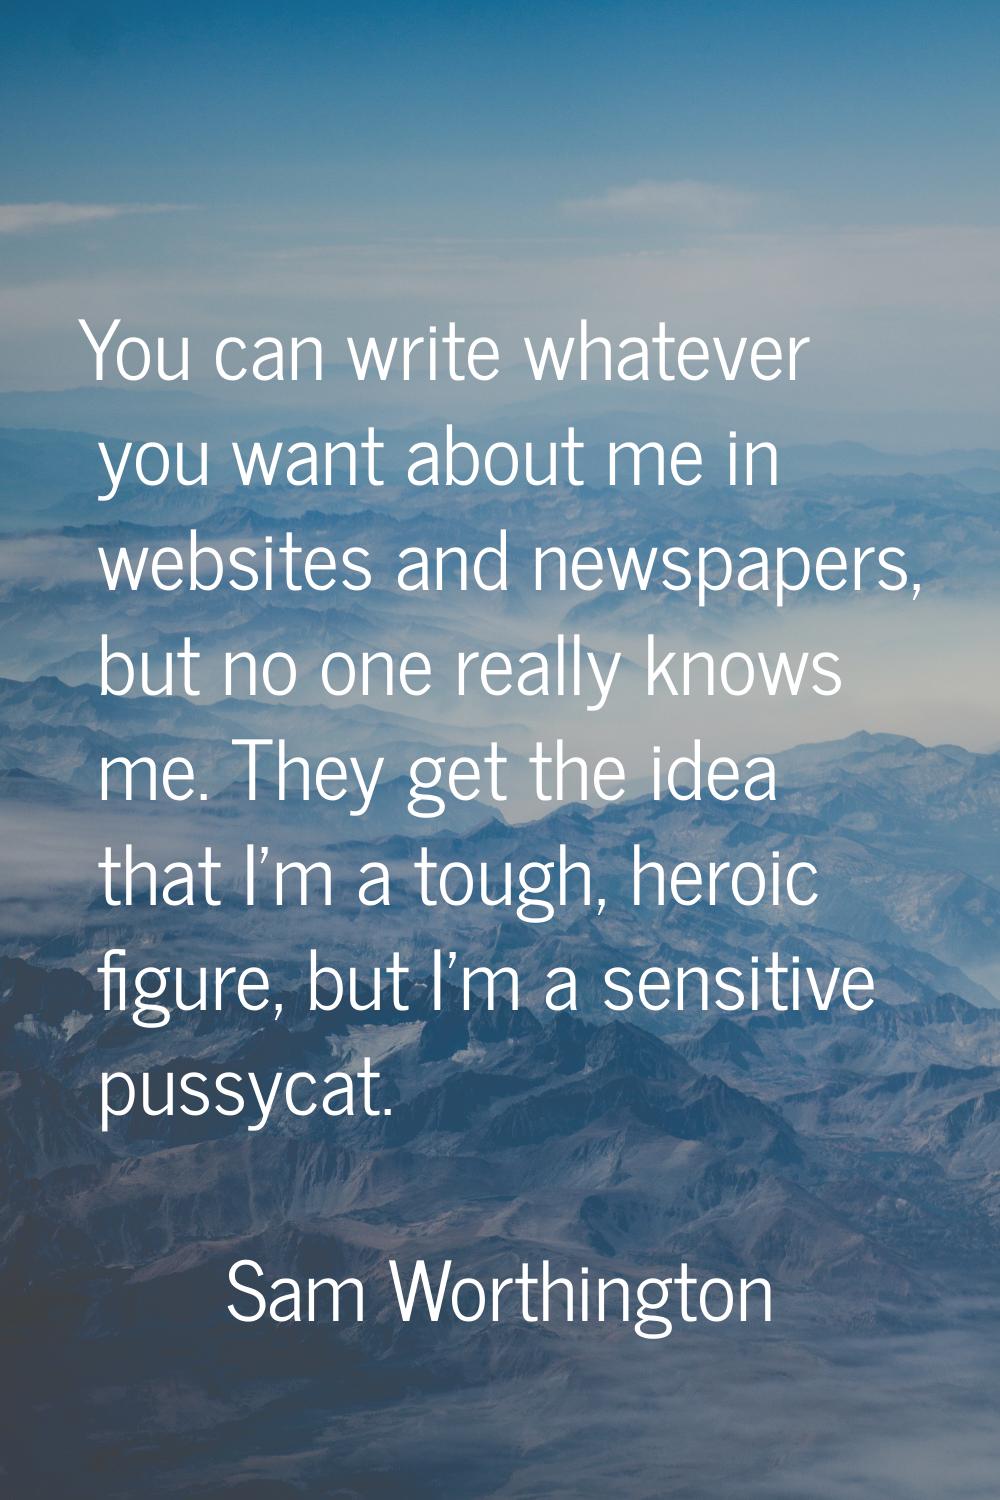 You can write whatever you want about me in websites and newspapers, but no one really knows me. Th